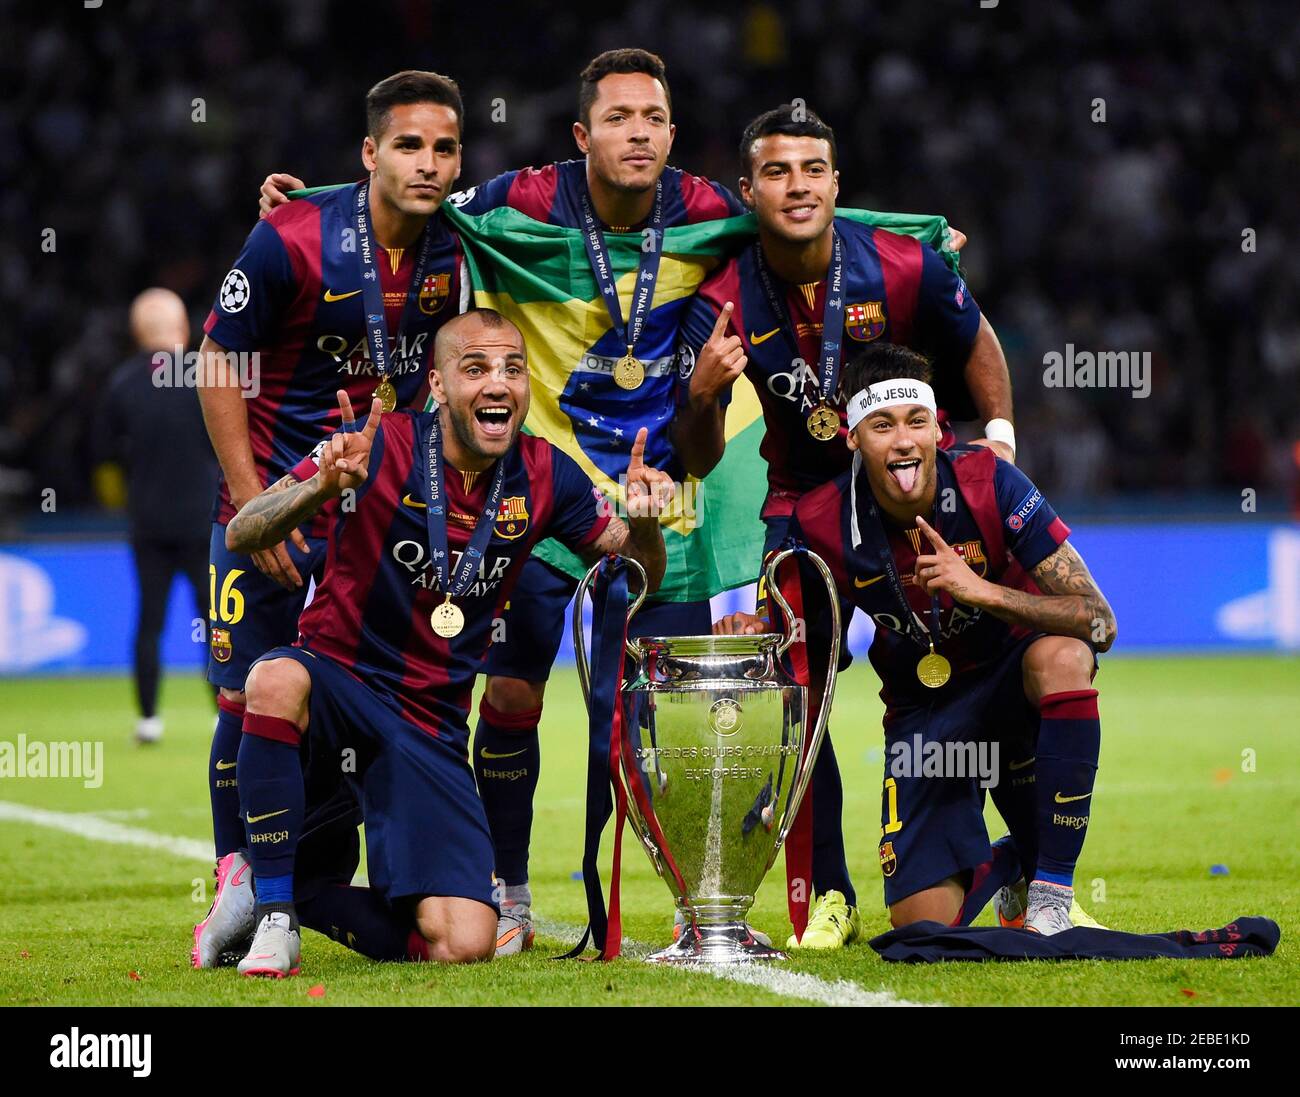 Football - FC Barcelona v Juventus - UEFA Champions League Final -  Olympiastadion, Berlin, Germany - 6/6/15 (From L-R) Barcelona's Douglas,  Dani Alves, Adriano, Rafinha and Neymar with the trophy after winning